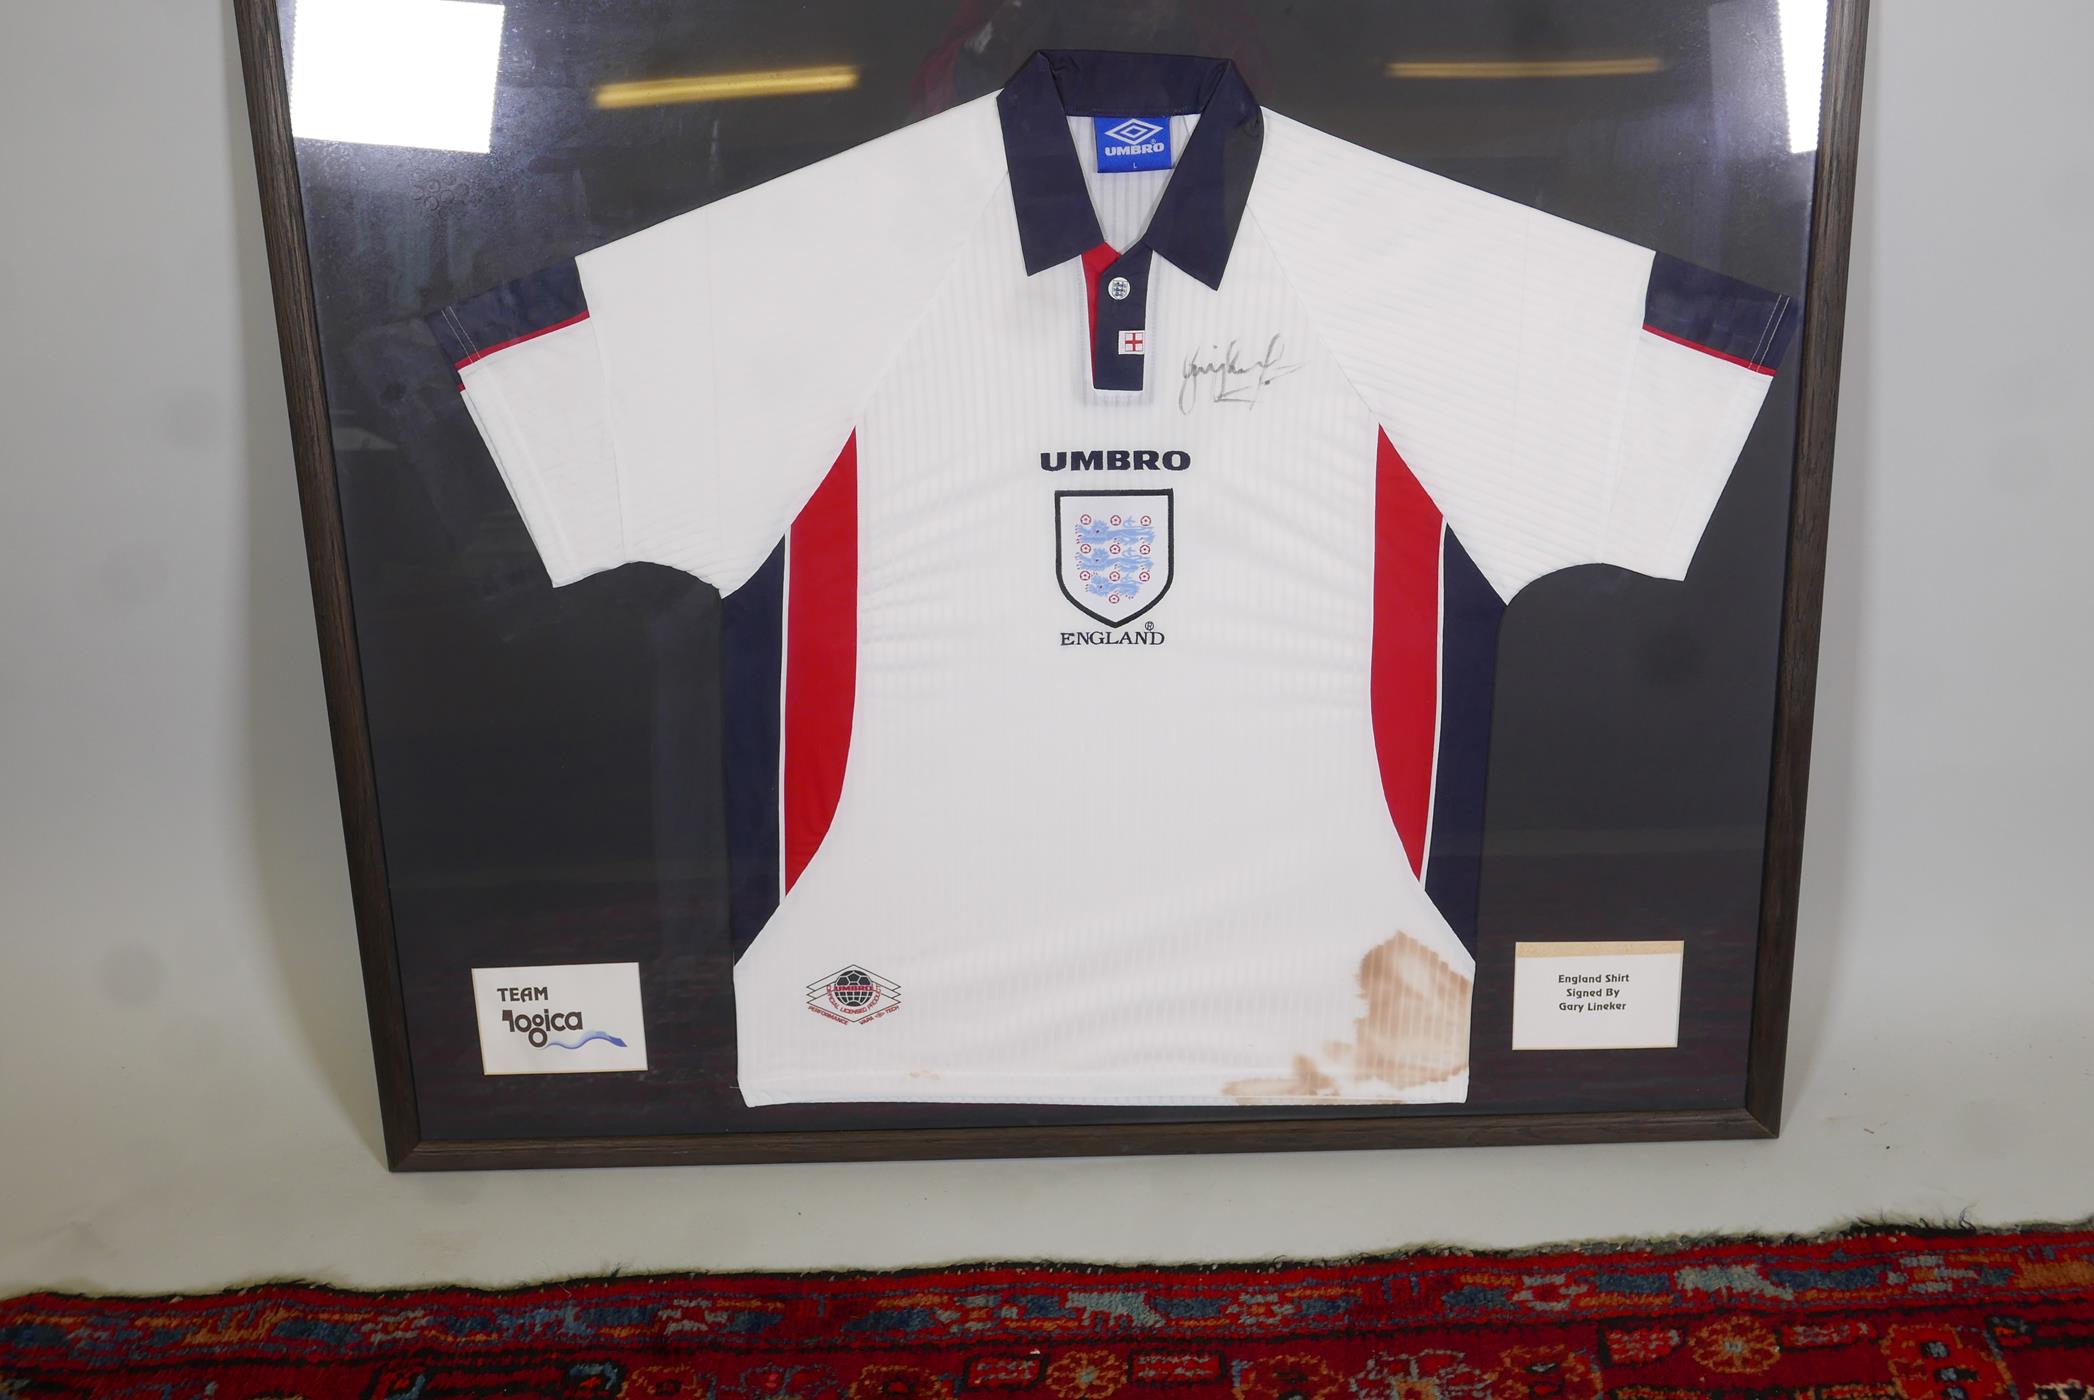 A framed 1998 England World Cup football shirt, purportedly signed by Gary Lineker. 44" x 37"